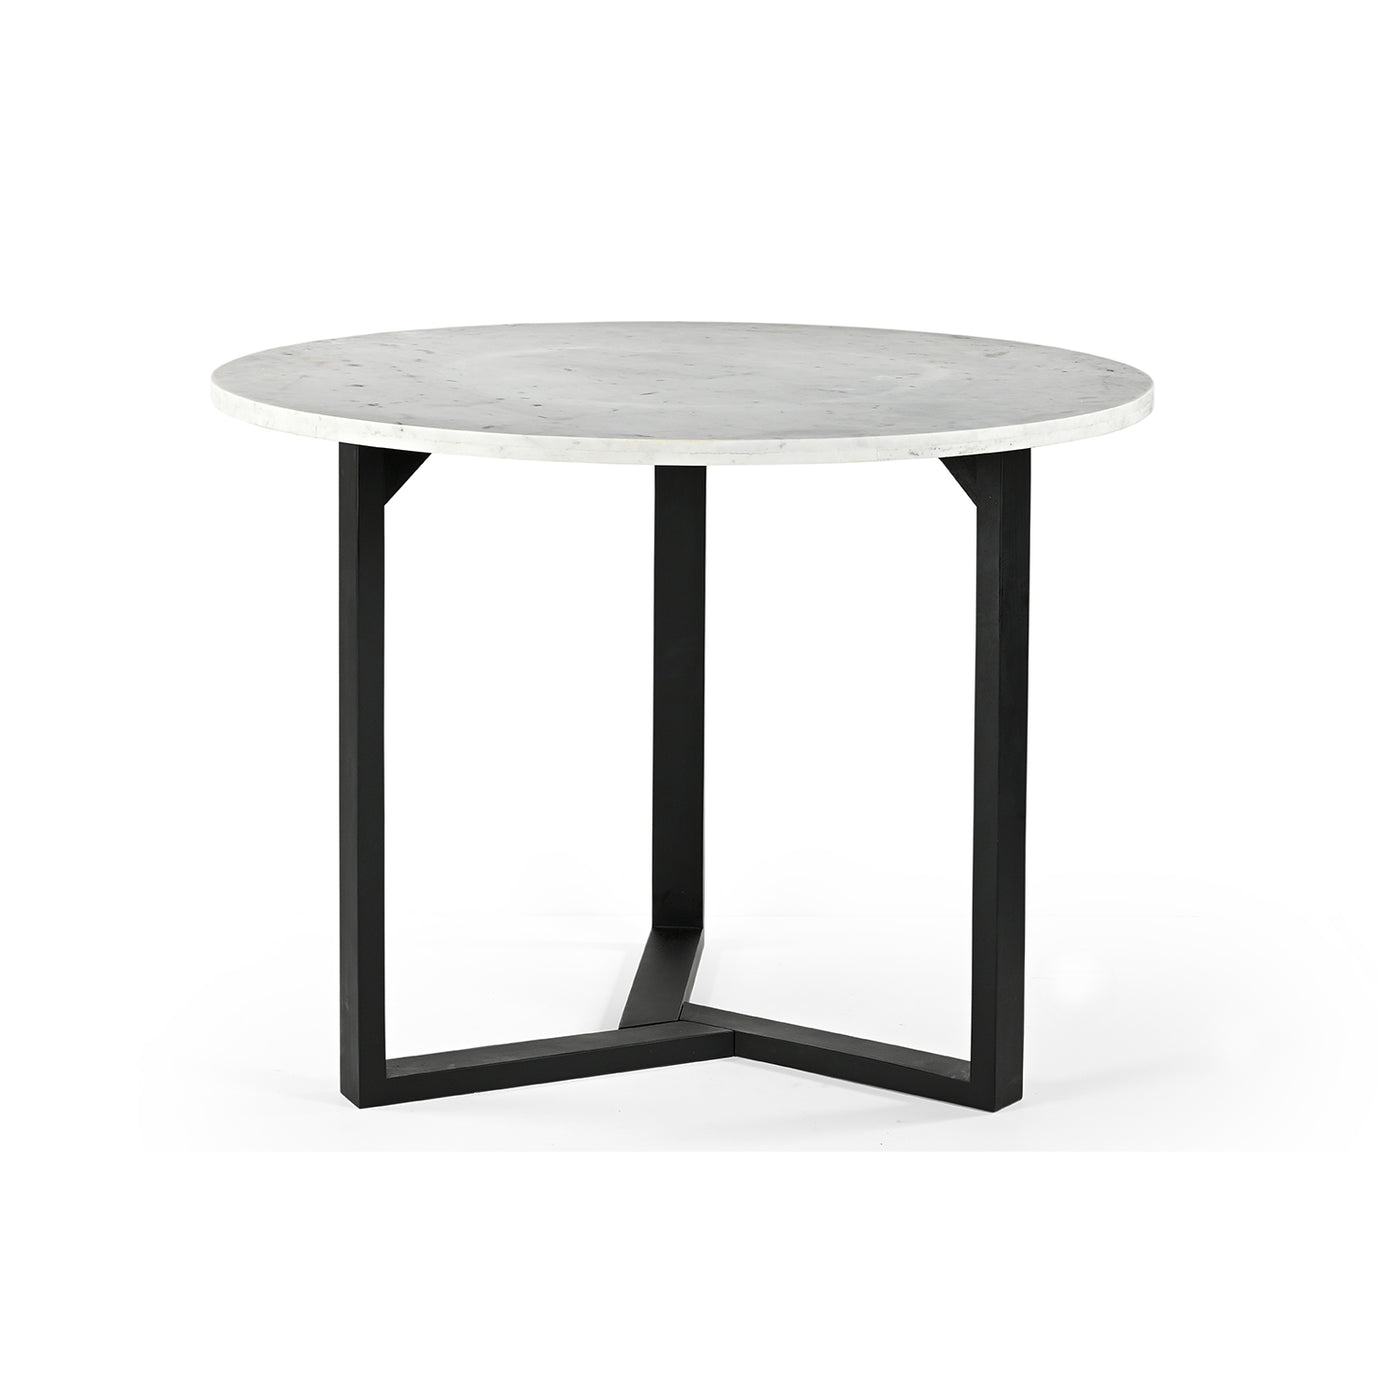 Kenza  40" Counter Height Table